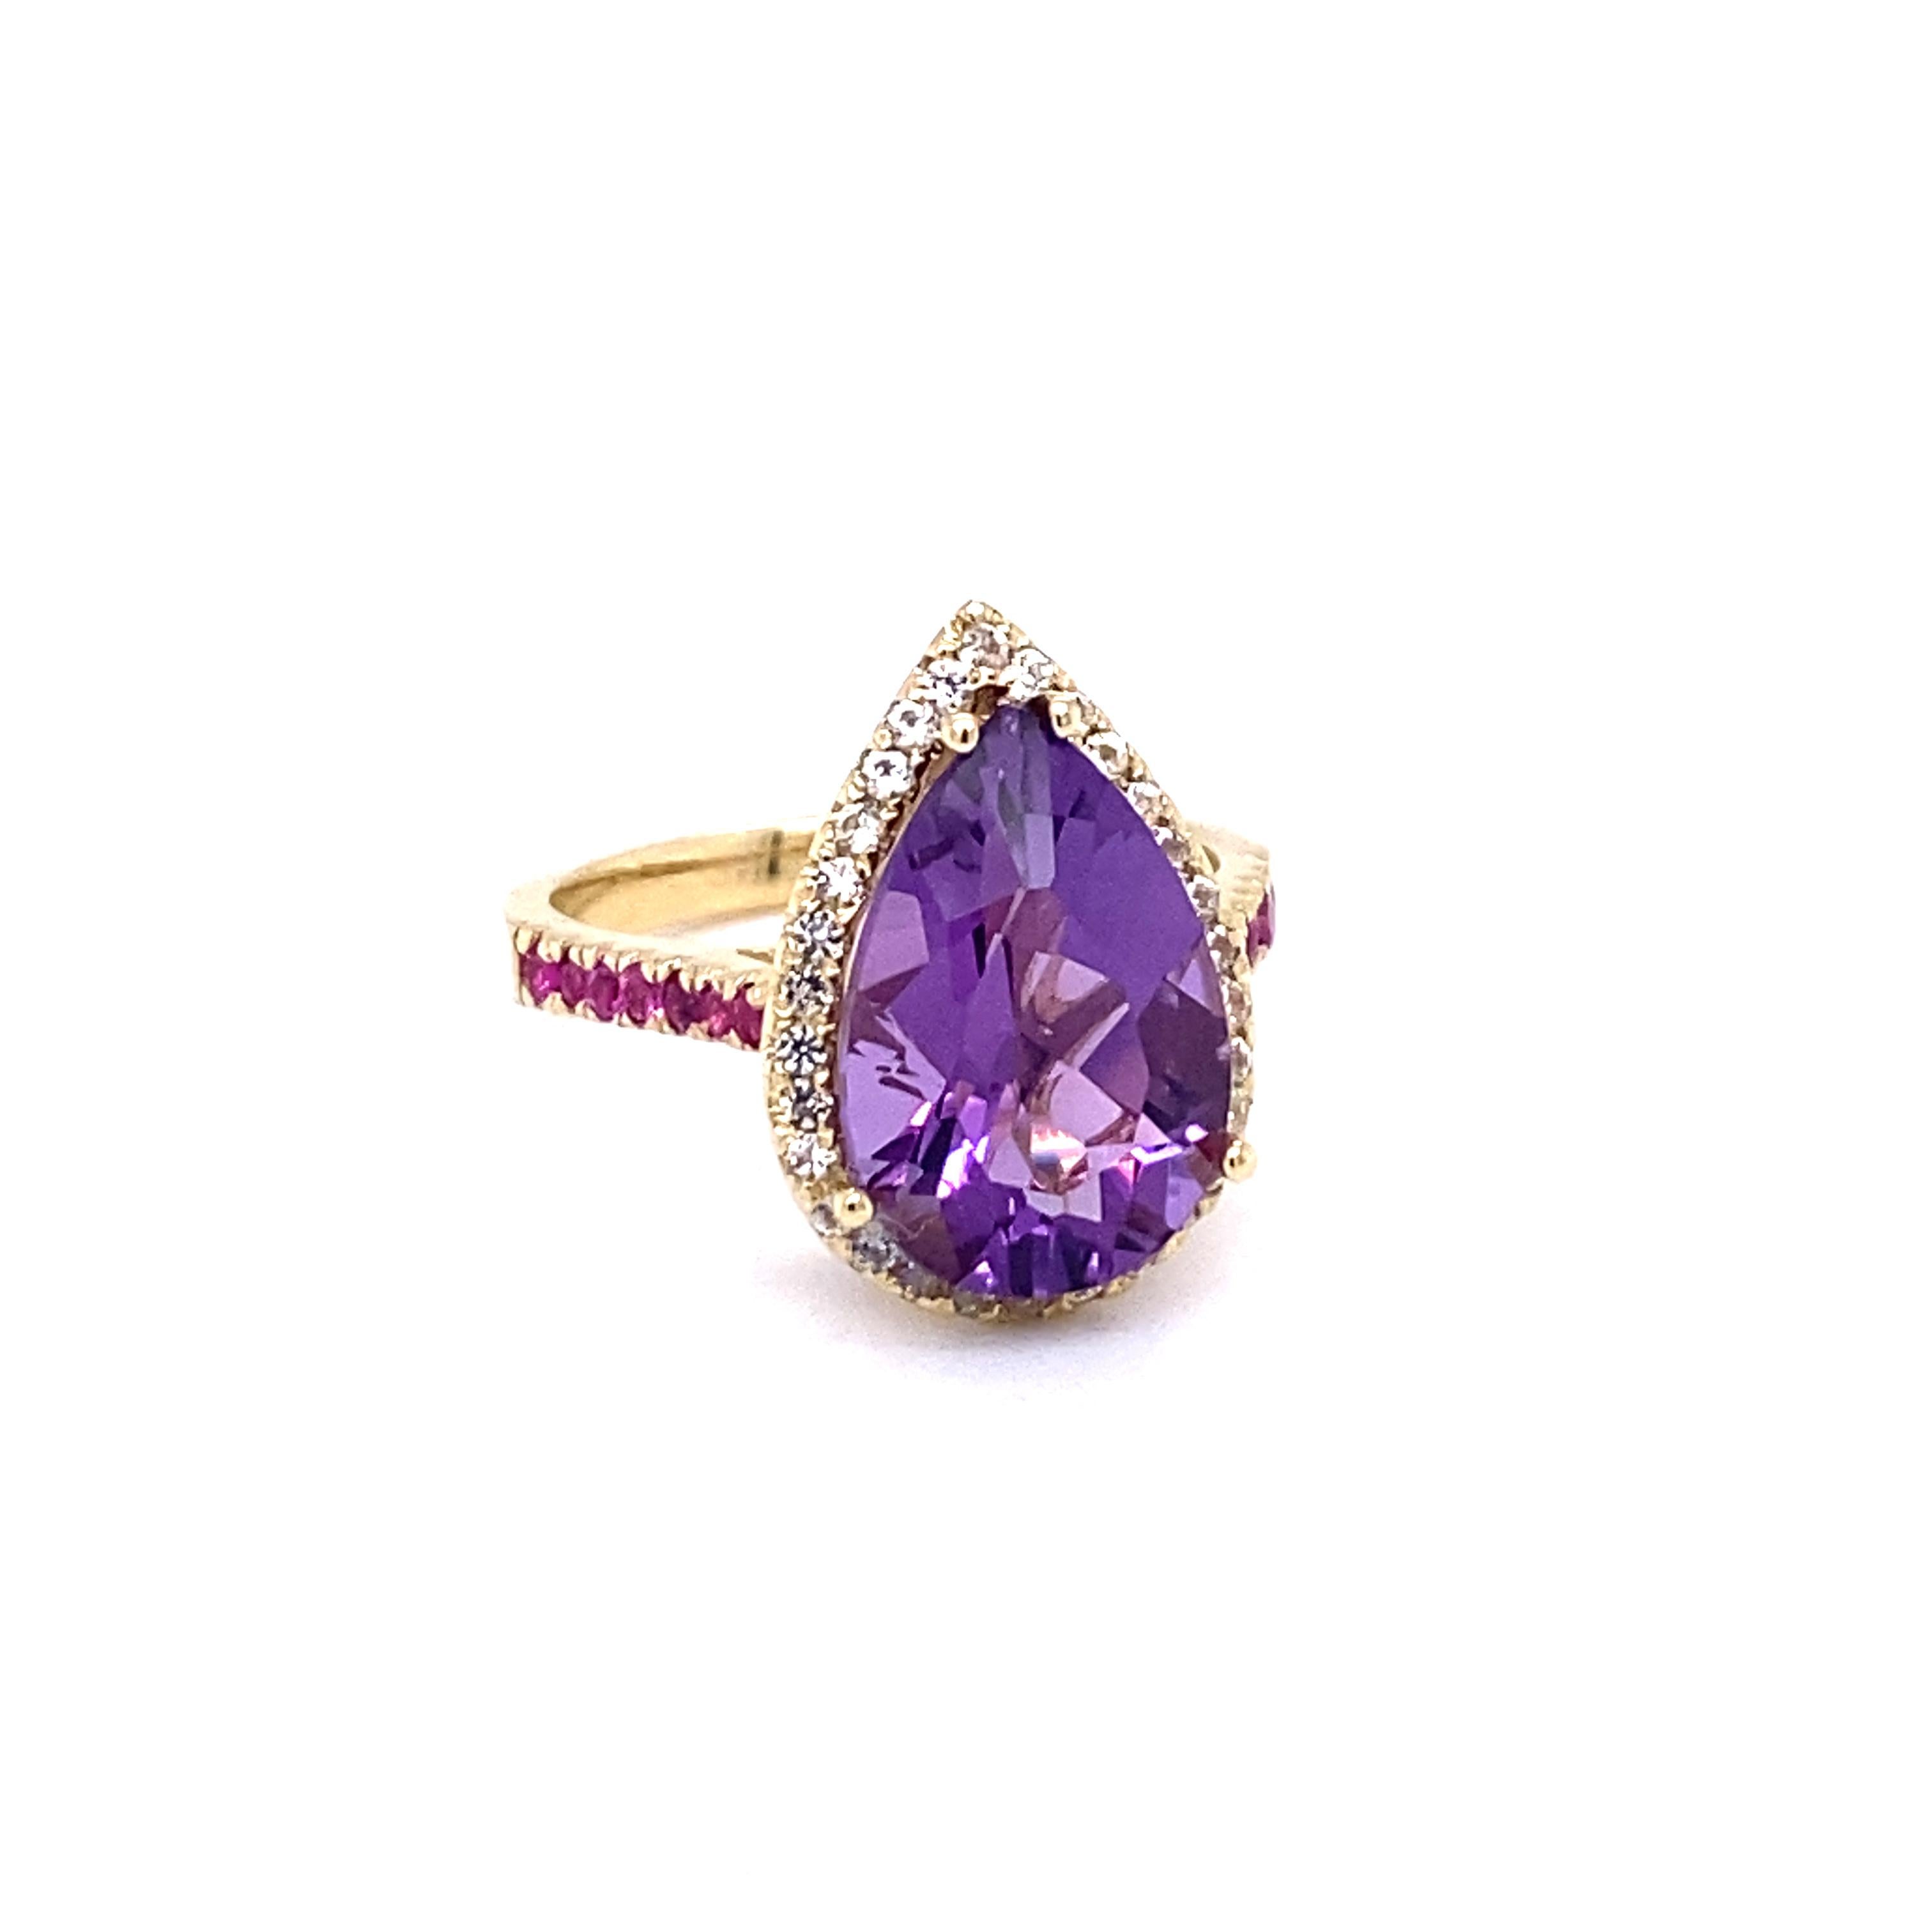 This Ring has a Pear Cut Amethyst that weighs 4.53 Carats and is embellished with a Halo 30 White Sapphires that weigh 0.35 Carats and 14 Pink Sapphires that weigh 0.30 Carats.  
The total carat weight of the ring is 5.18 Carats. 

The Amethyst has